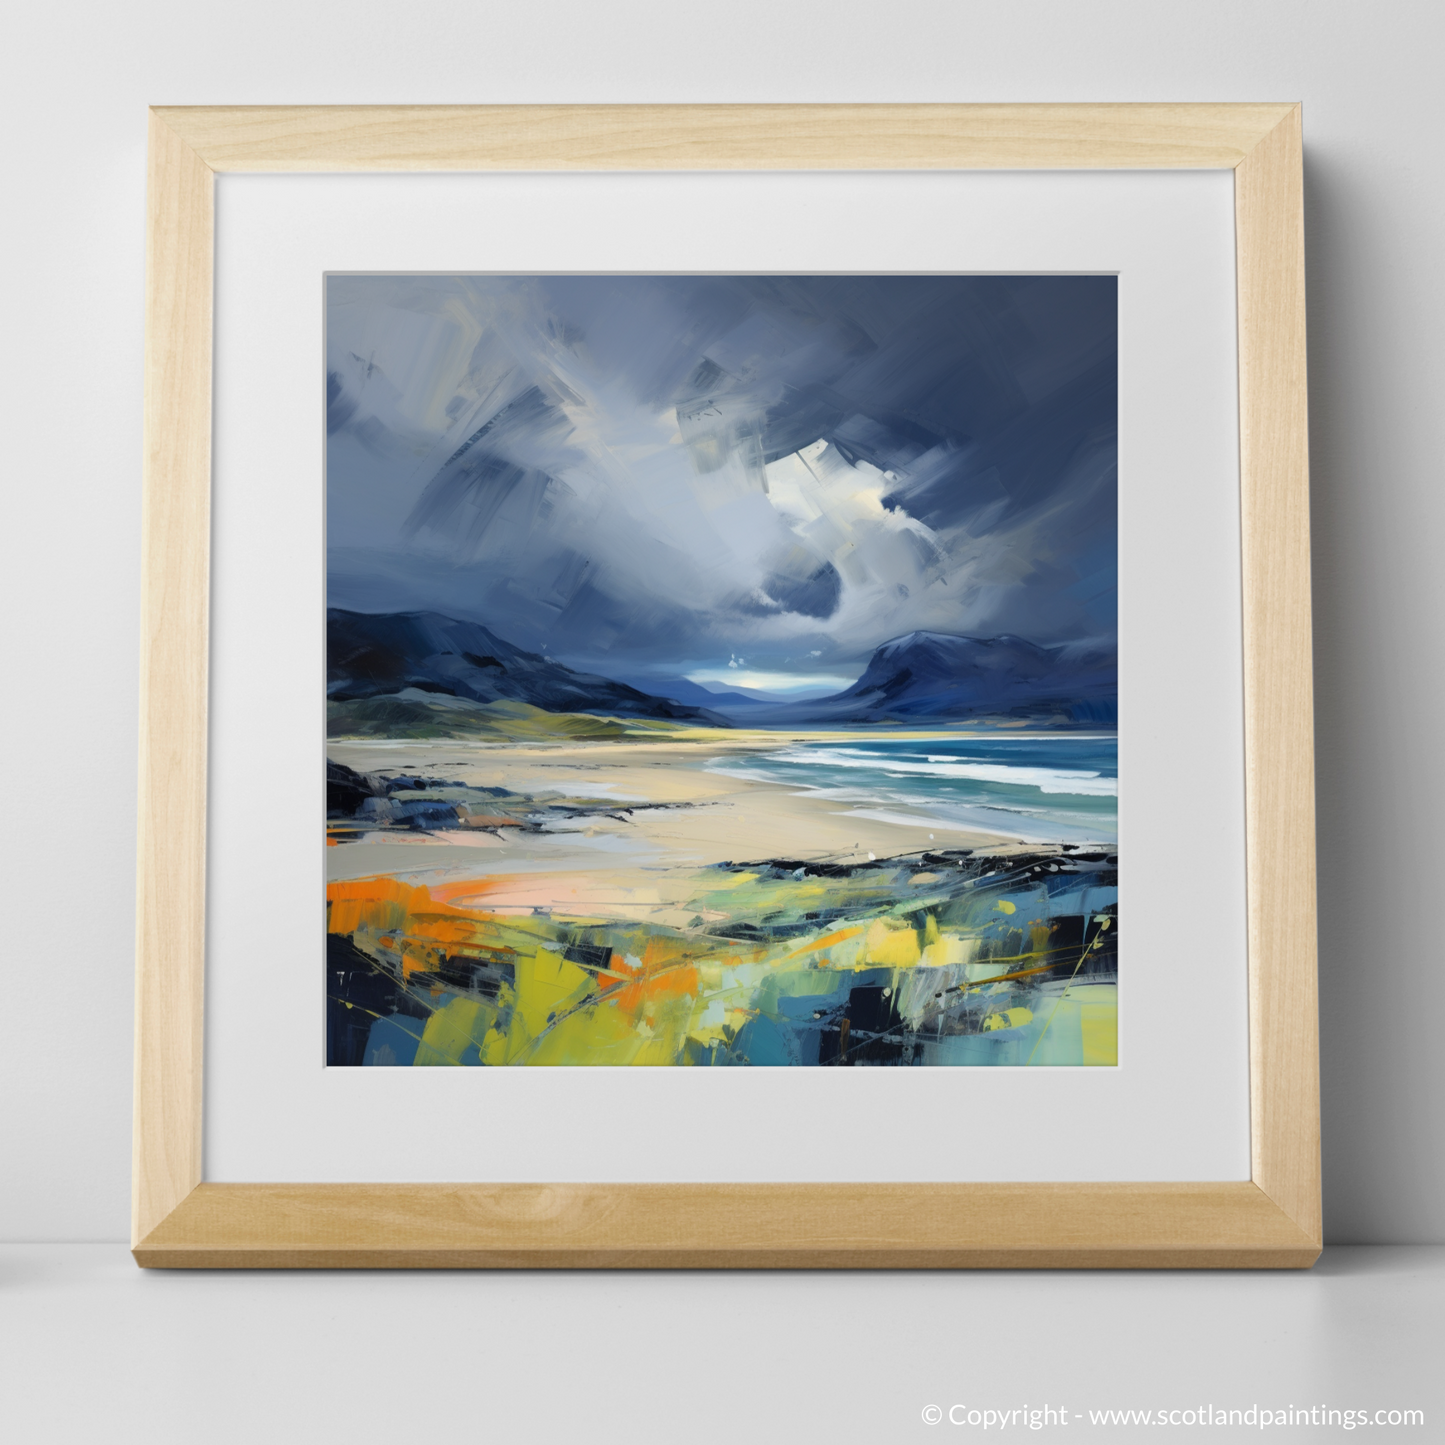 Painting and Art Print of Scarista Beach with a stormy sky. Storm's Embrace: An Expressionist Ode to Scarista Beach.